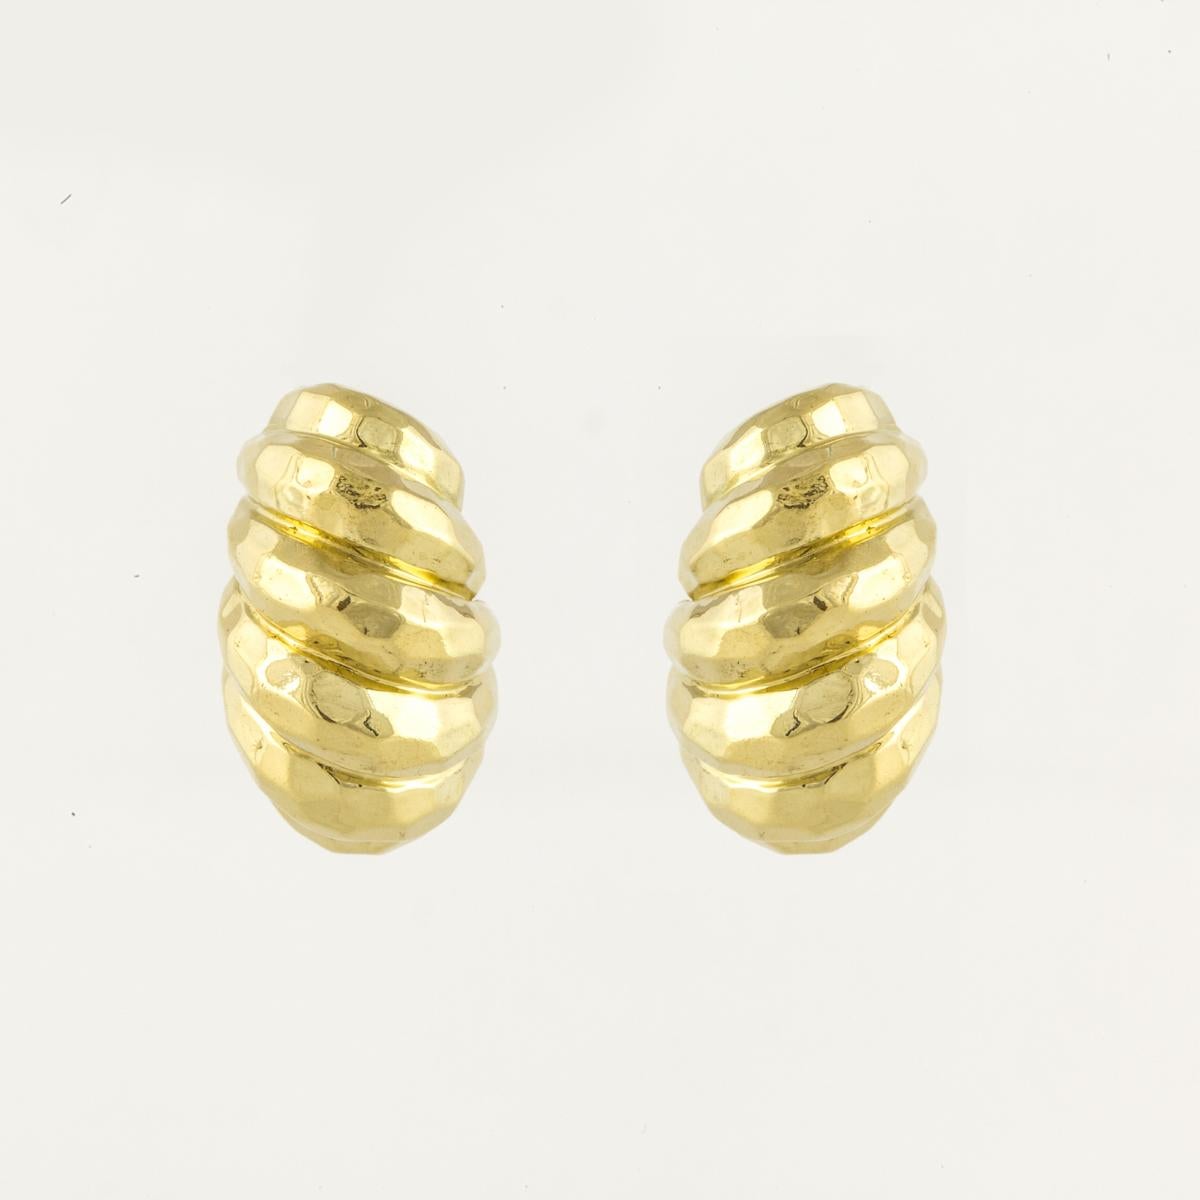 Henry Dunay earrings in a modified shrimp style composed of hammered 18K yellow gold,  They measure 1 3/16 inches long by 5/8 inches wide and 1/2 inch deep.  They are a clip style.